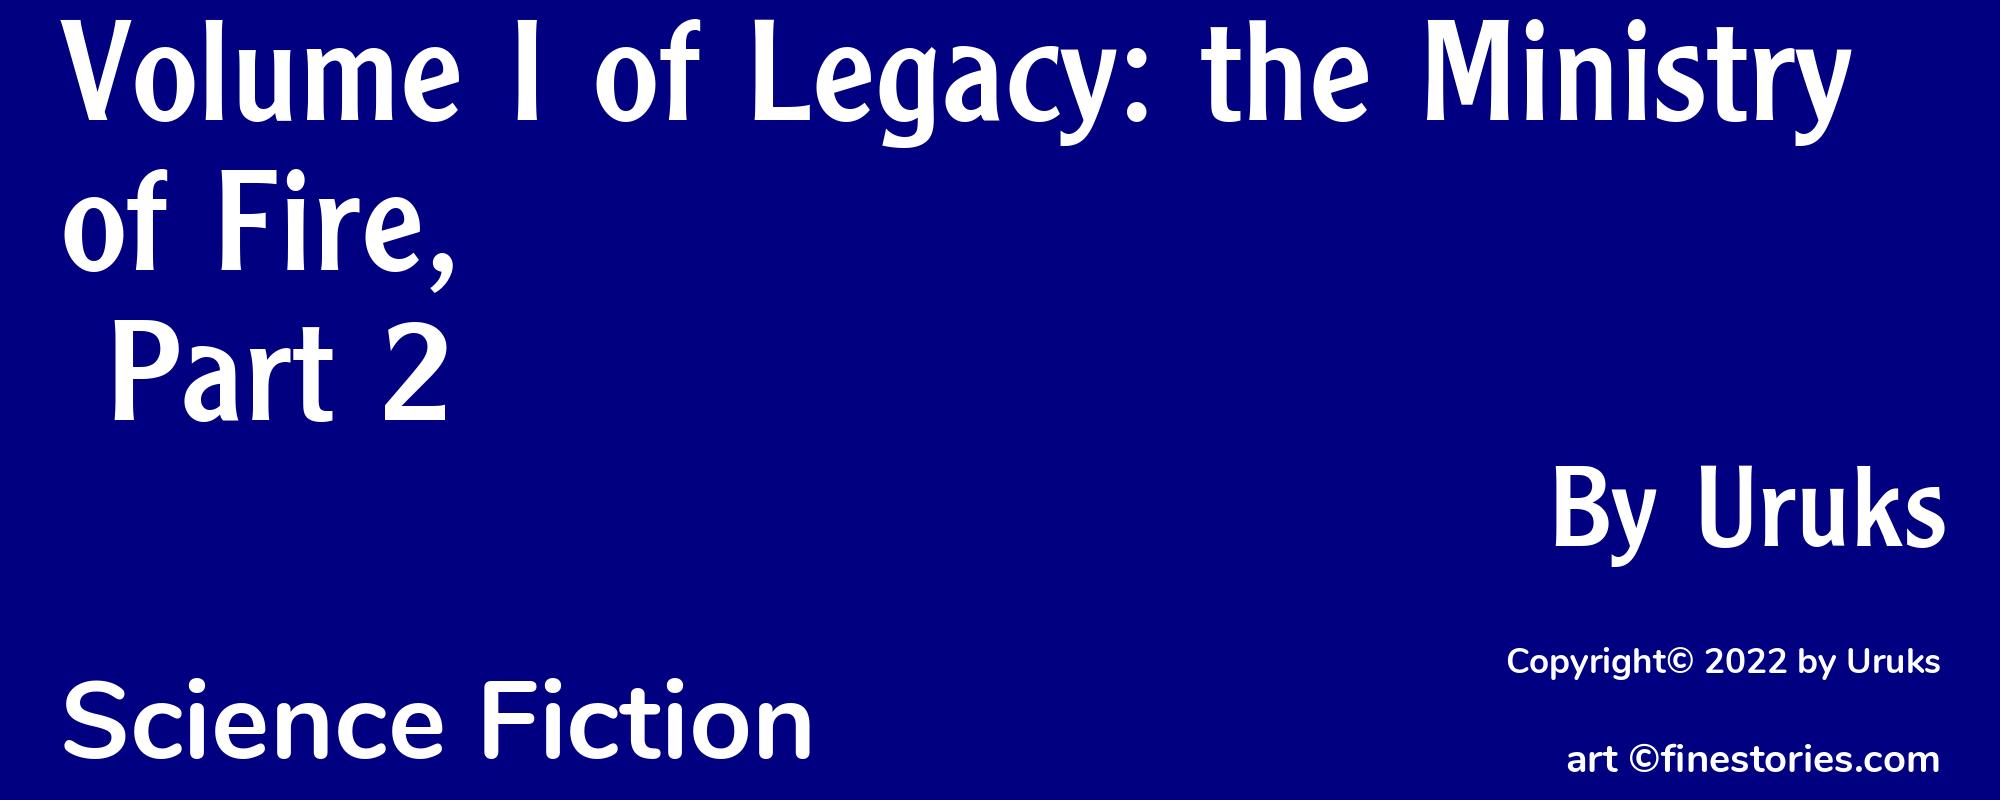 Volume I of Legacy: the Ministry of Fire, Part 2 - Cover